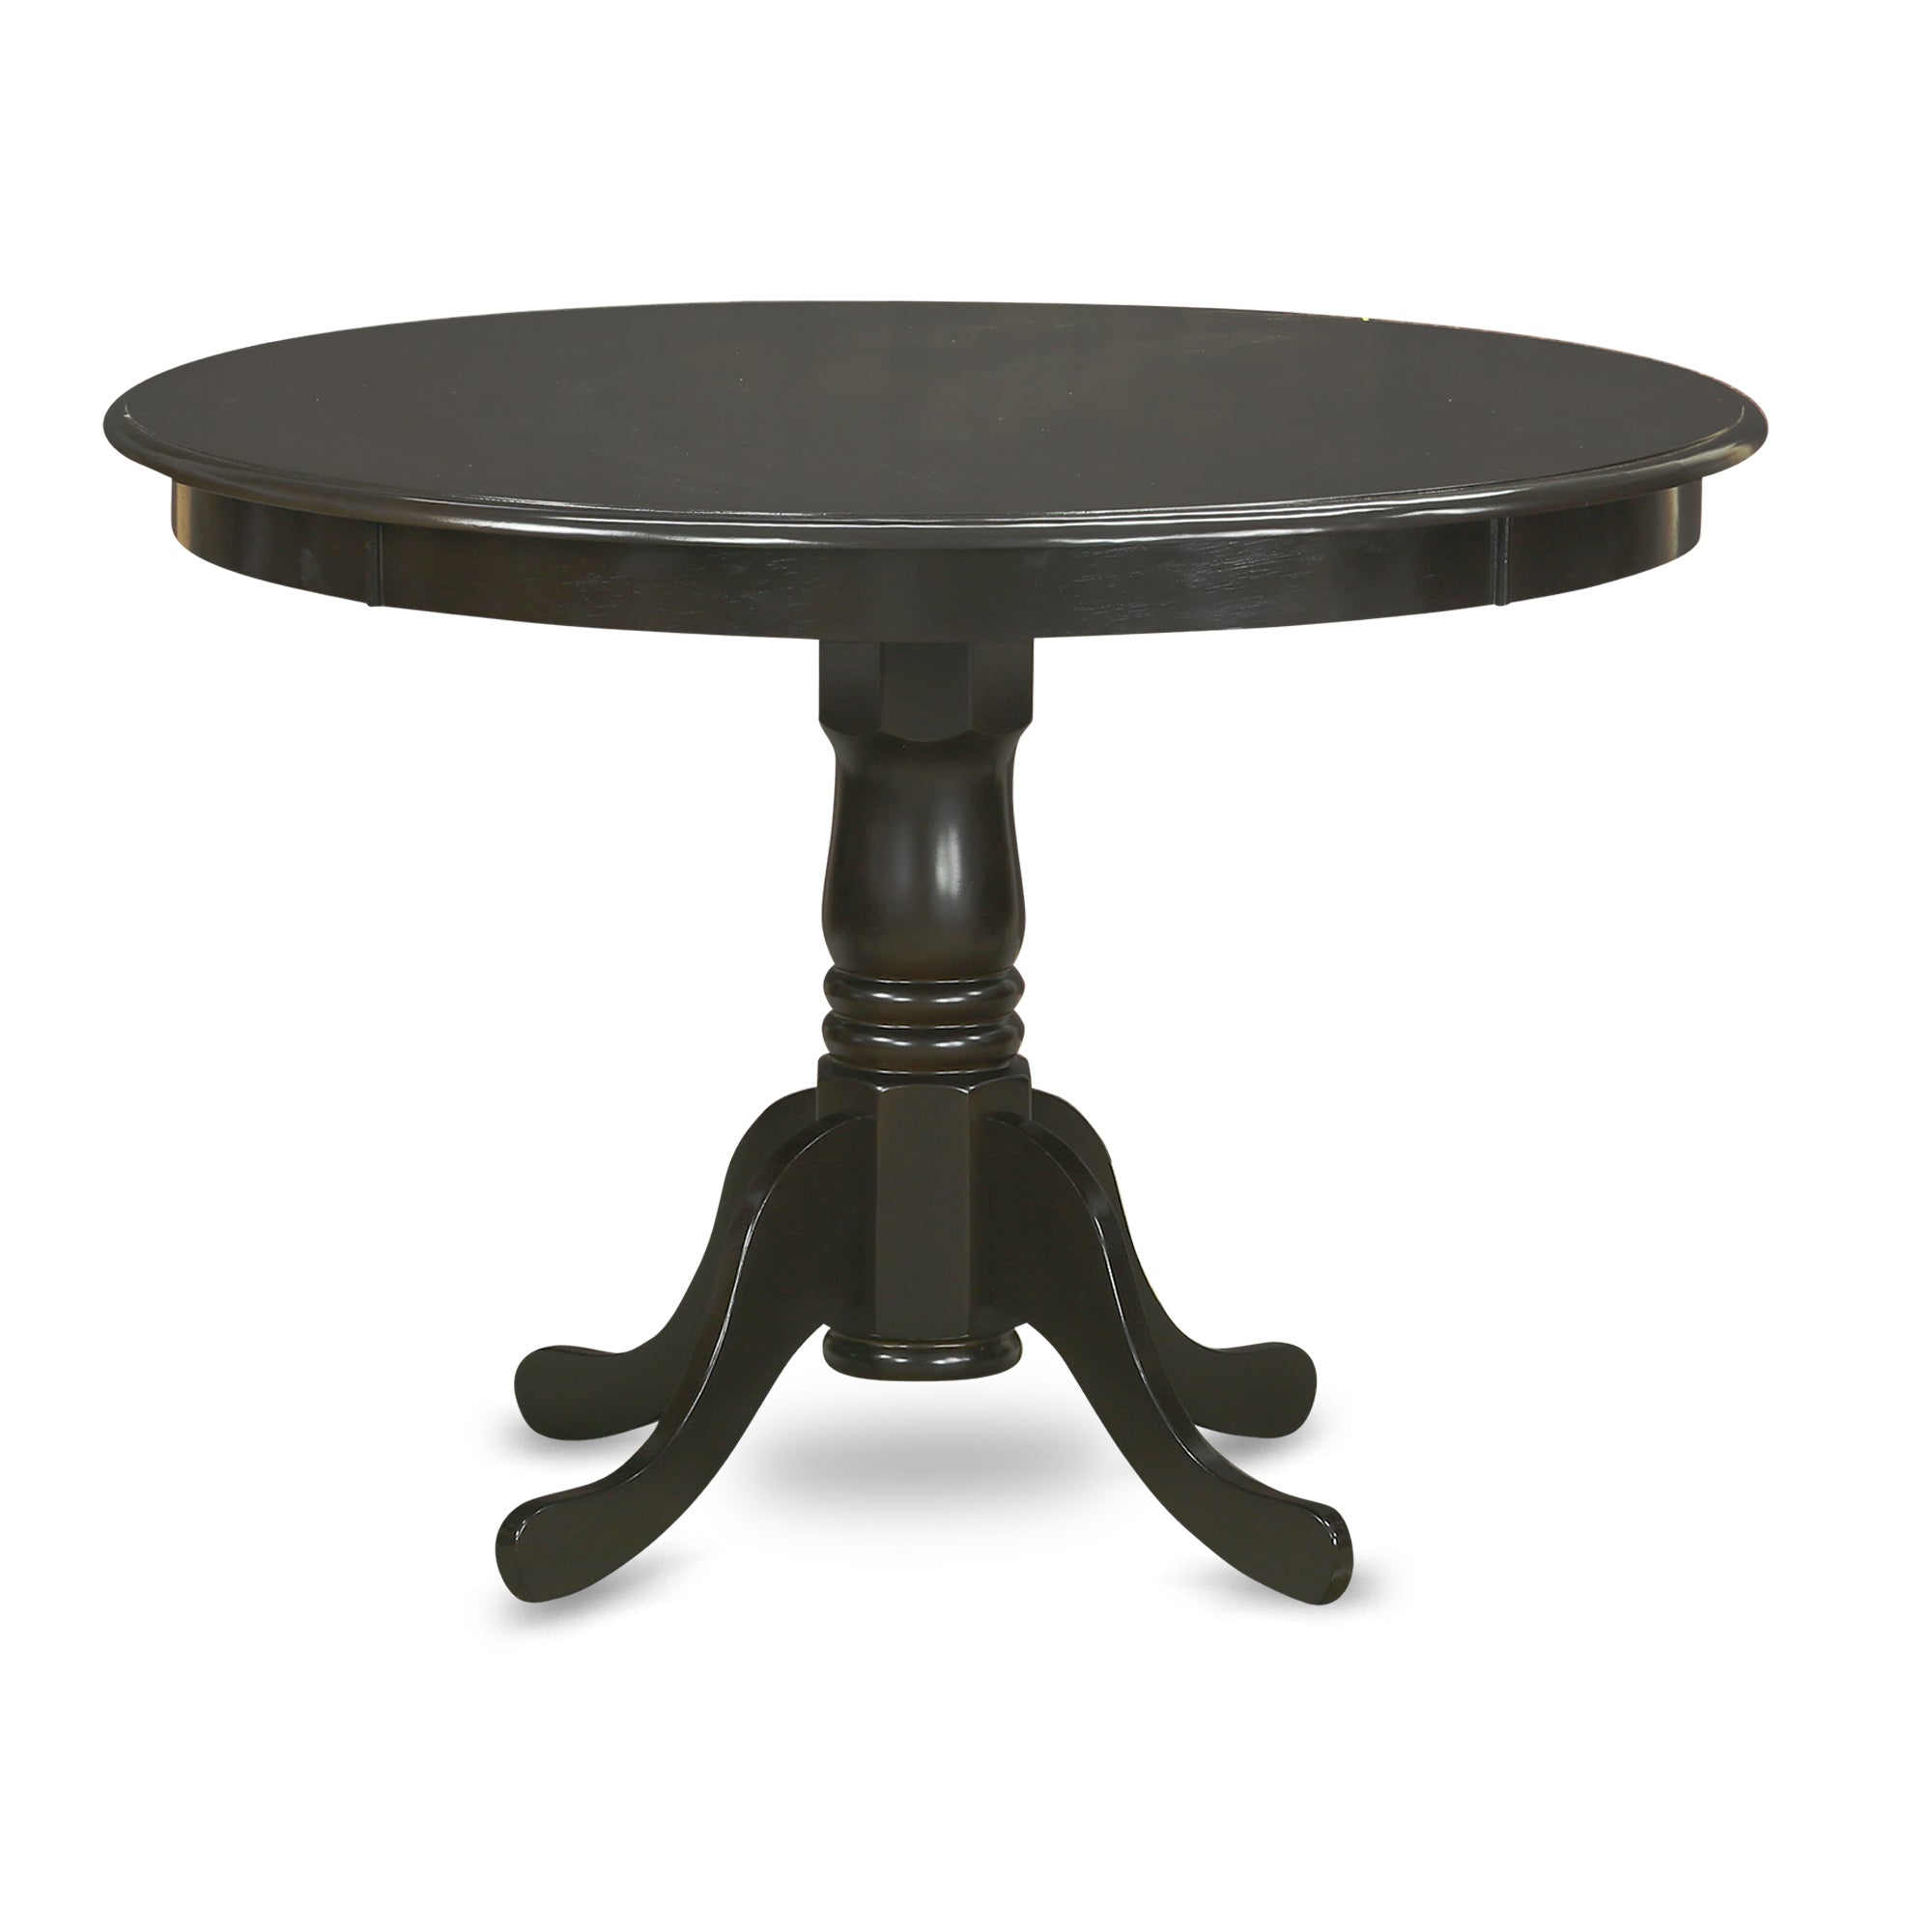 HLDR3-CAP-03 3Pc Round 42" Dining Table And Two Parson Chair With Cappuccino Finish Leg And Linen Fabric- Brown Color